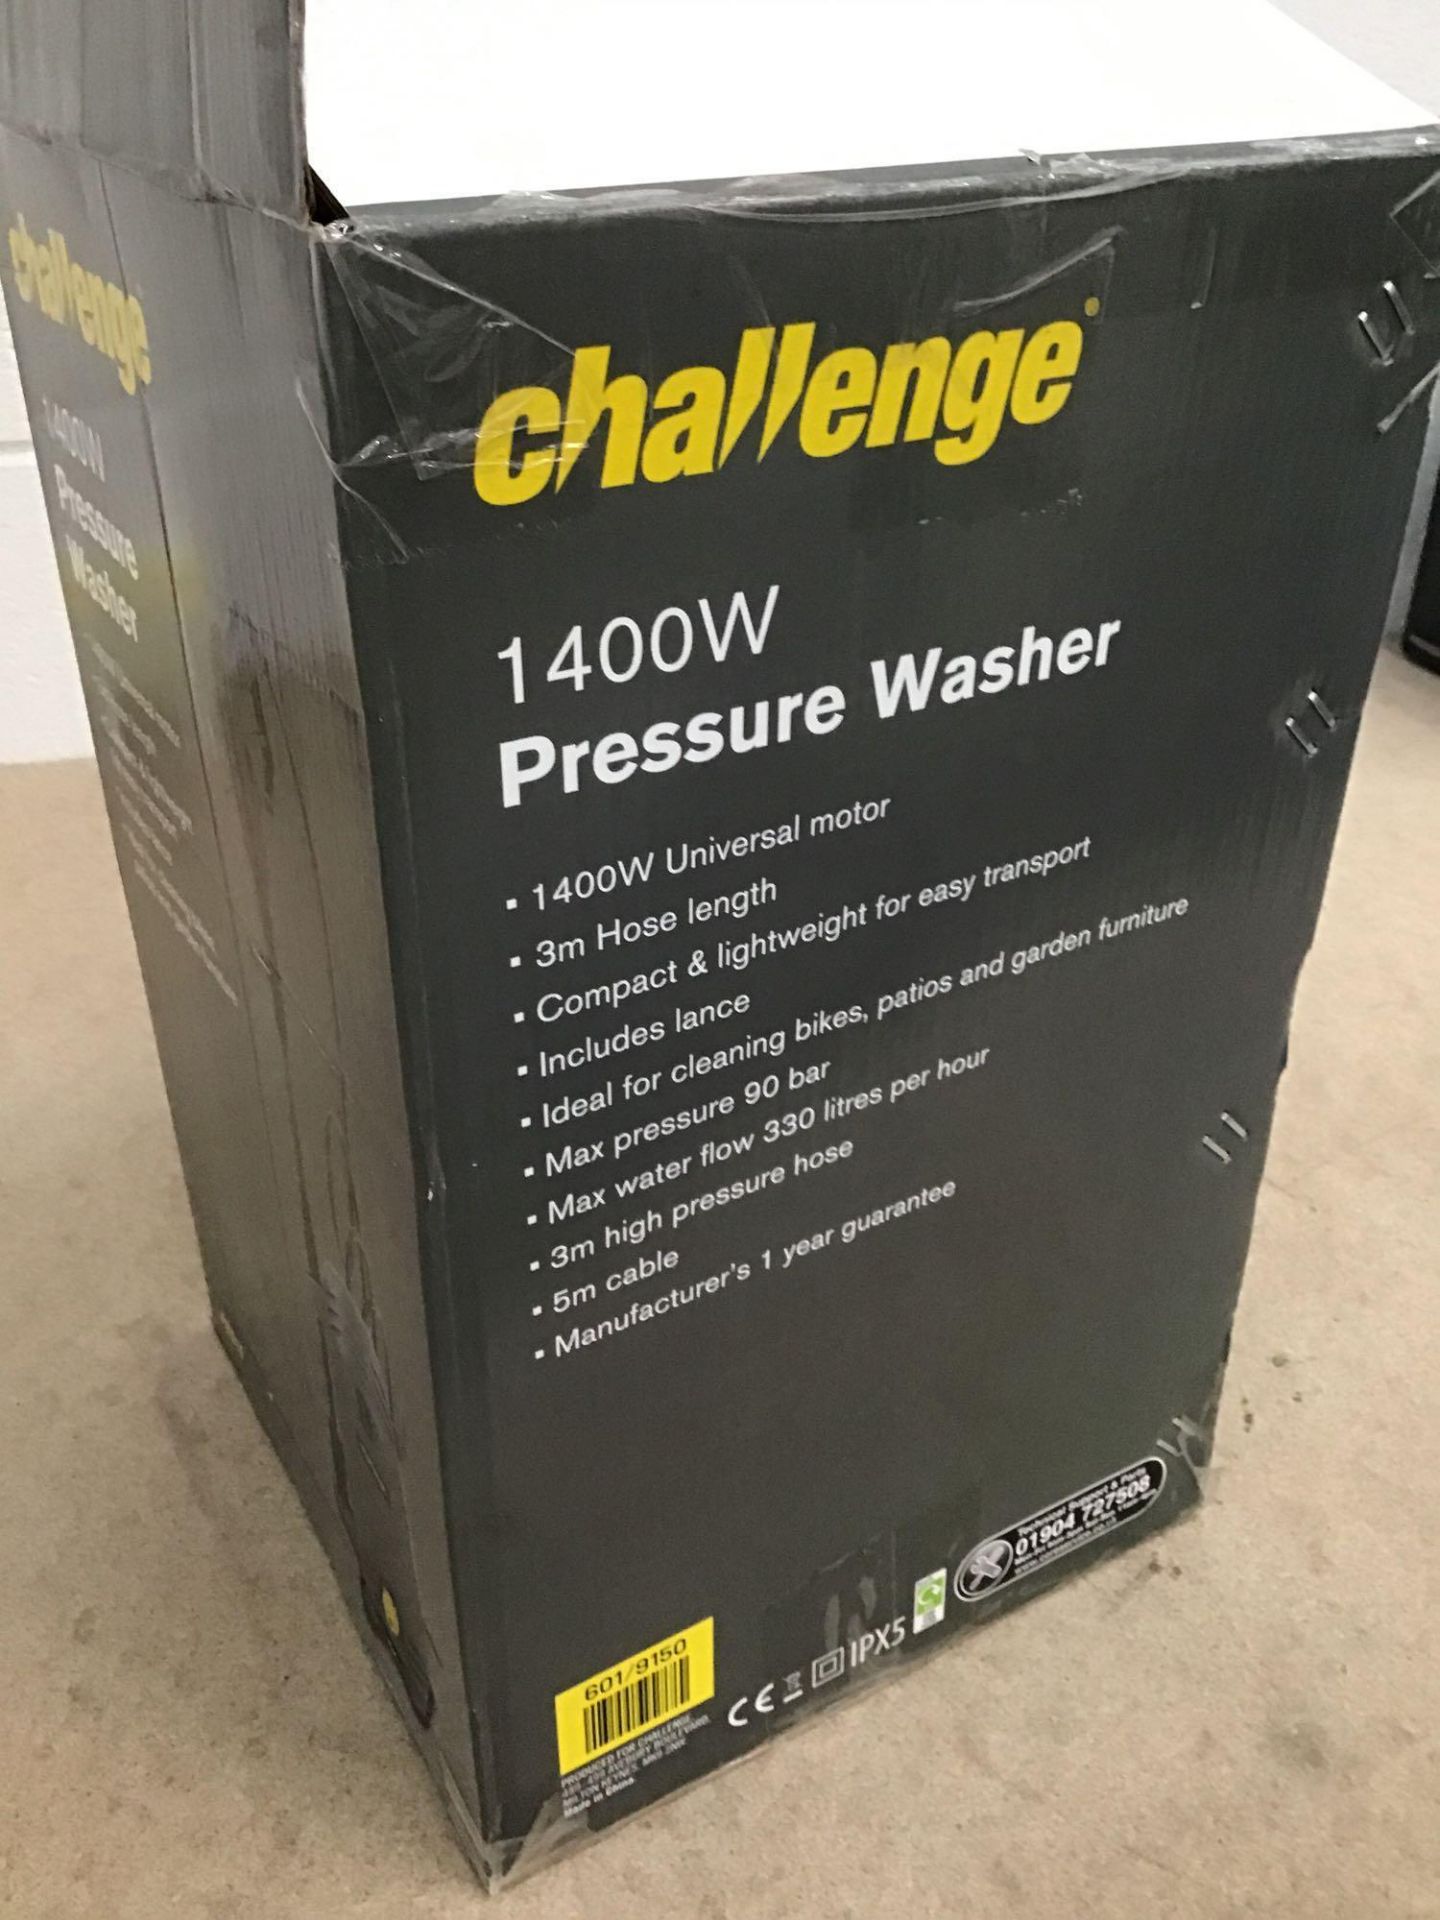 Challenge Pressure Washer - 1400W - £45.00 RRP - Image 4 of 6